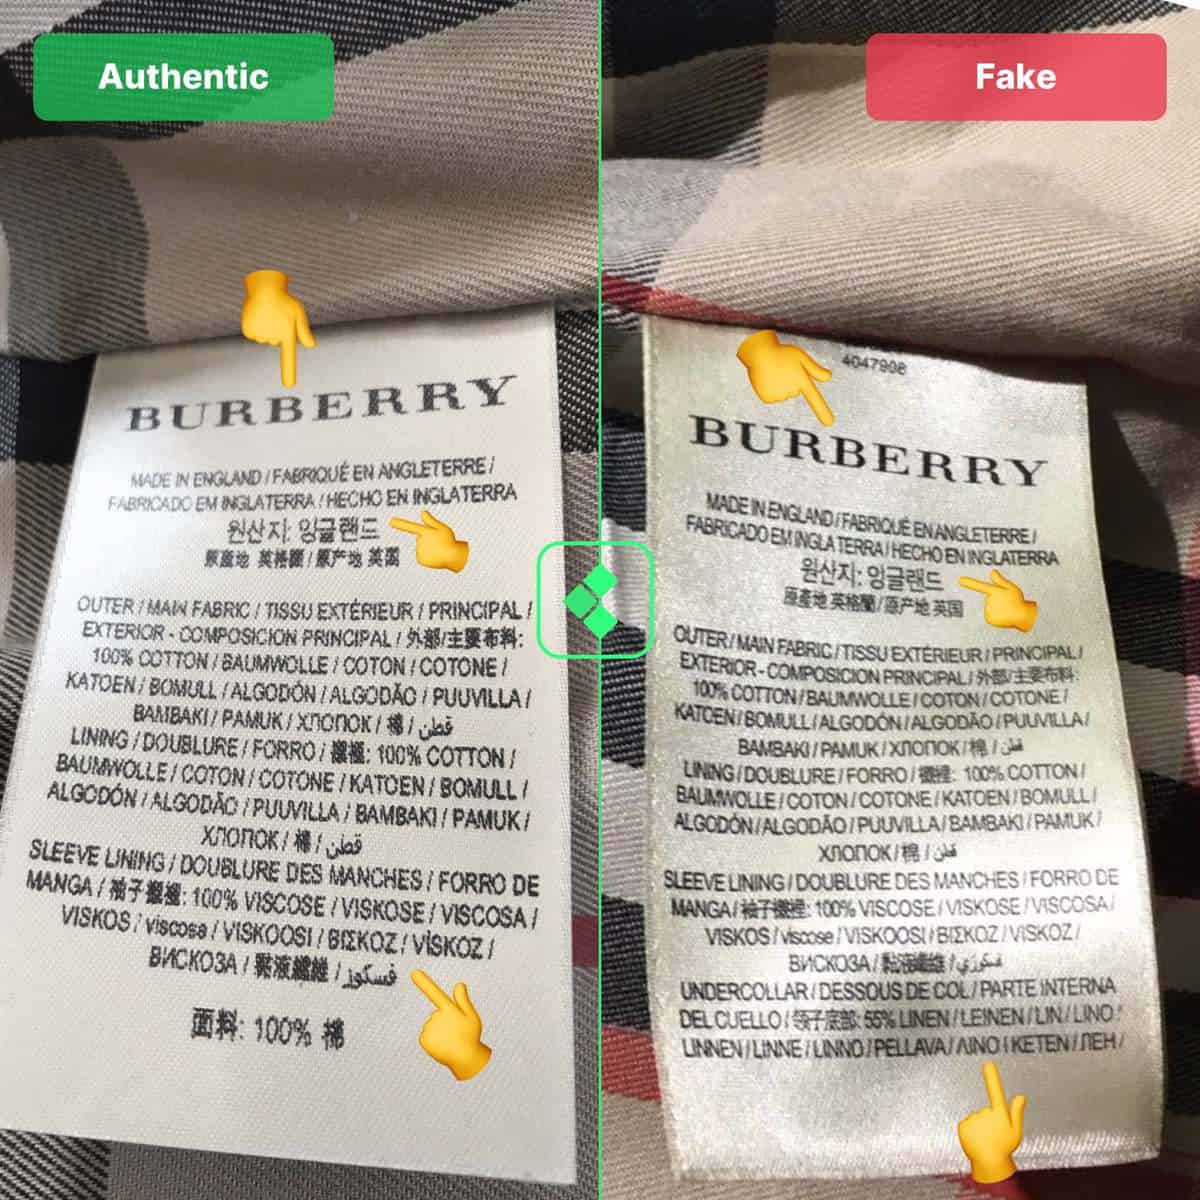 How To Spot Fake Burberry Coats In 2021 – Fake Vs Real Burberry Trench Coat  Guide